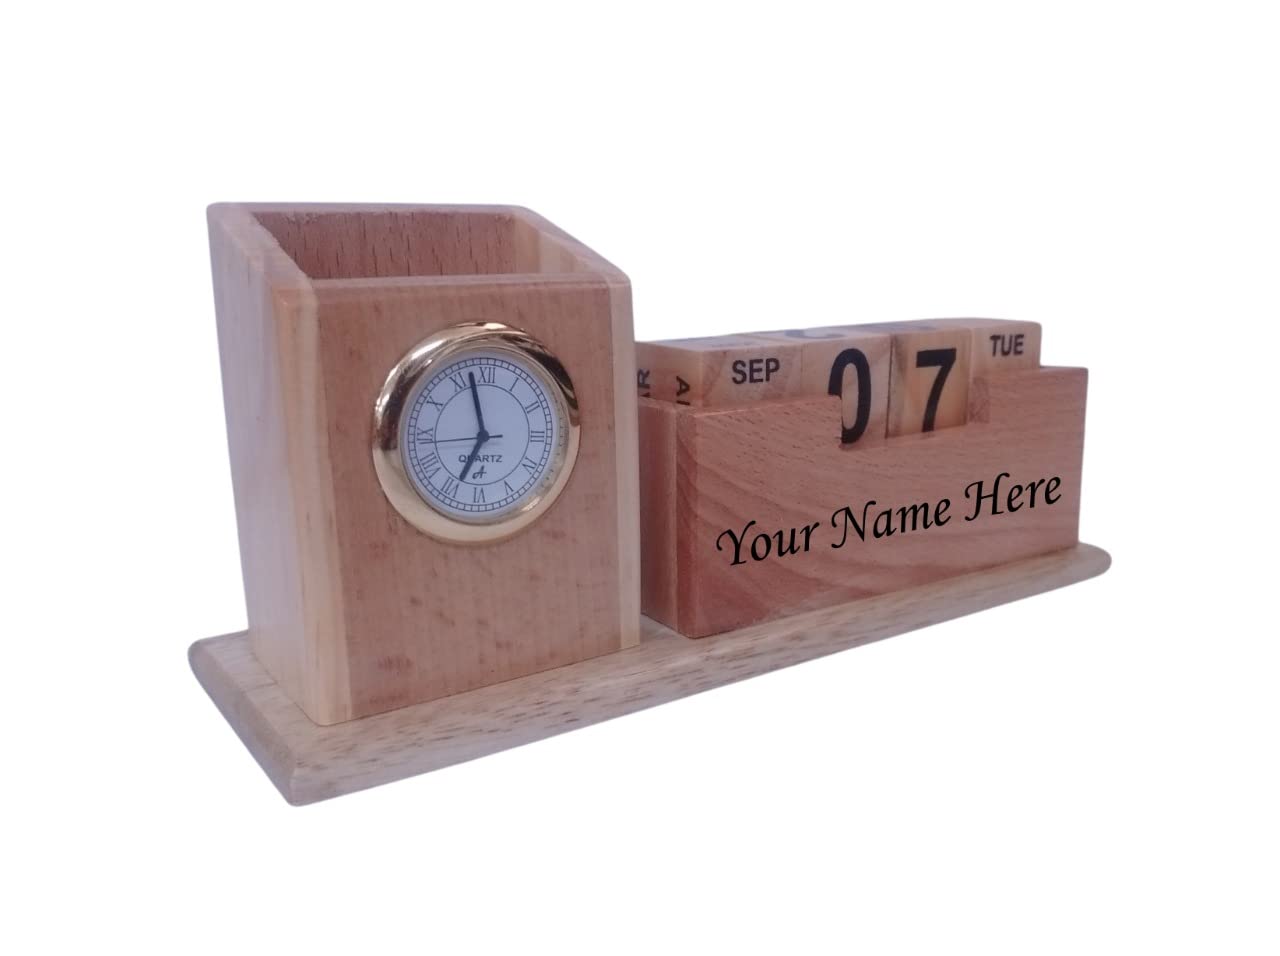 Paramount Dealz Personalized Gift, Wooden Desk Organizer with Clock